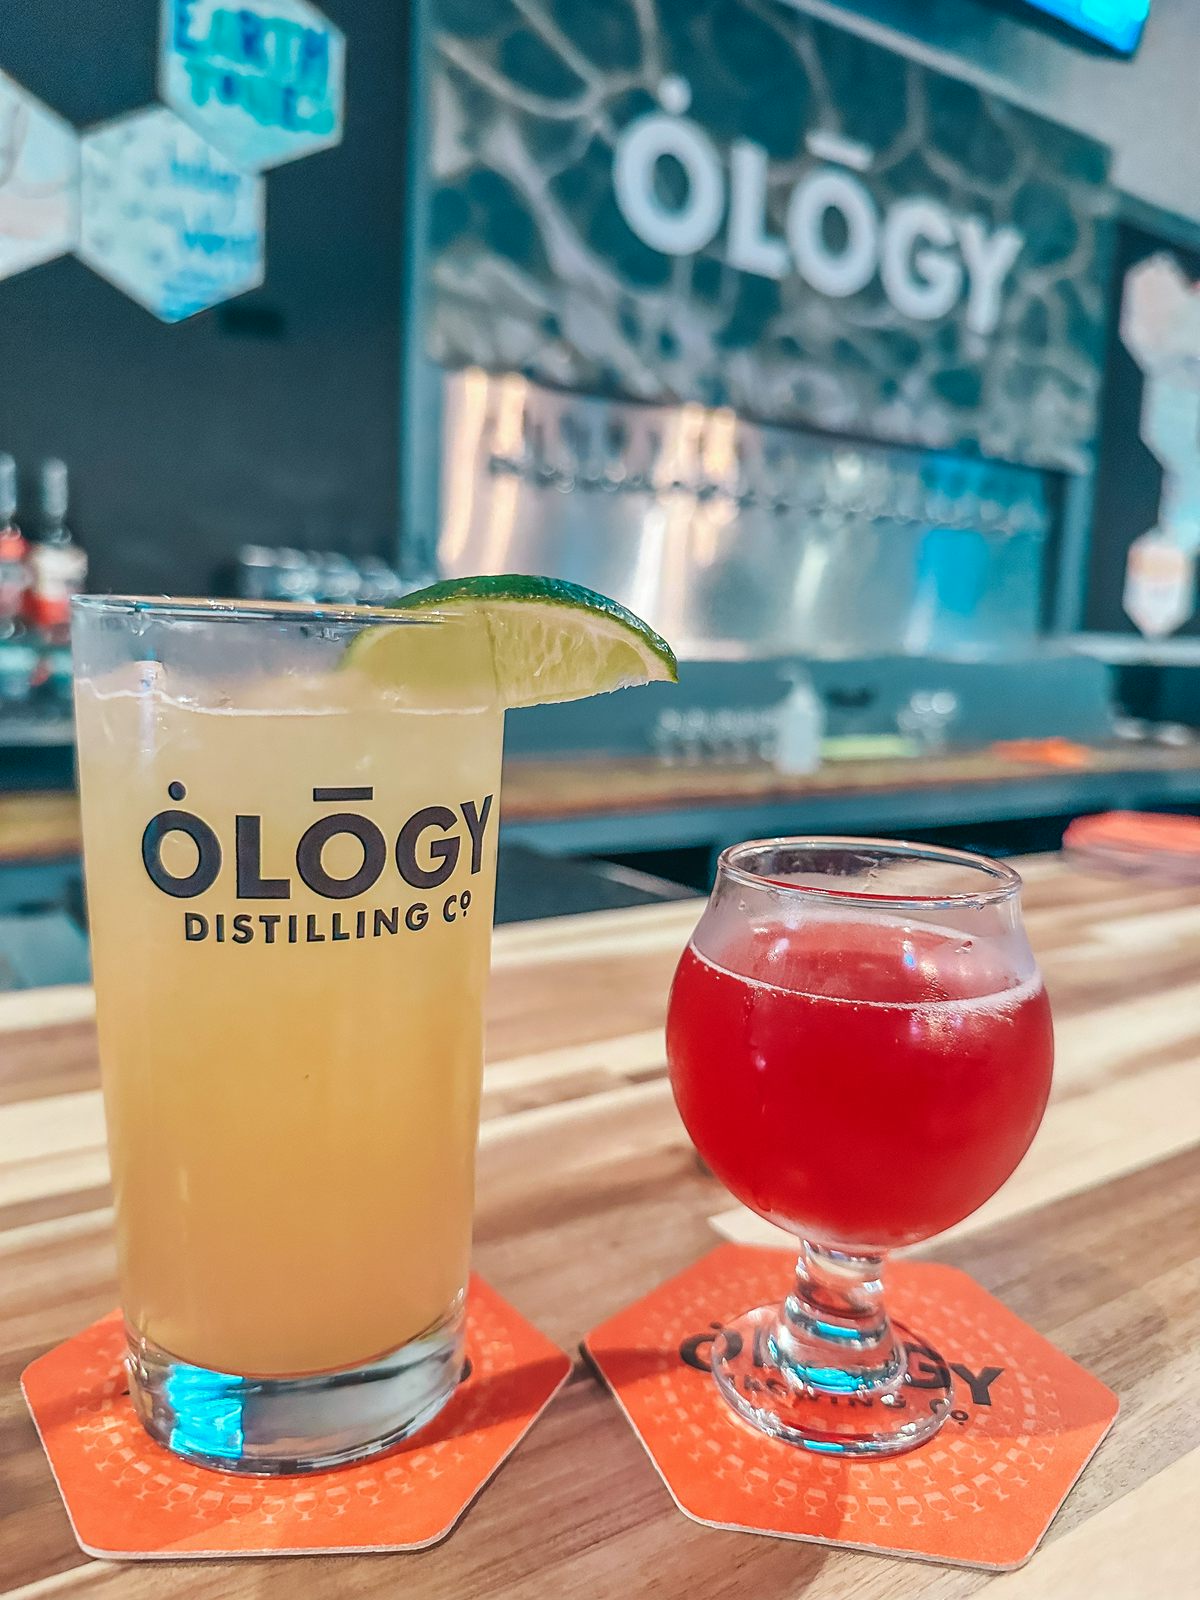 Ology Distilling Co cocktail and beer in Seminole Heights Tampa